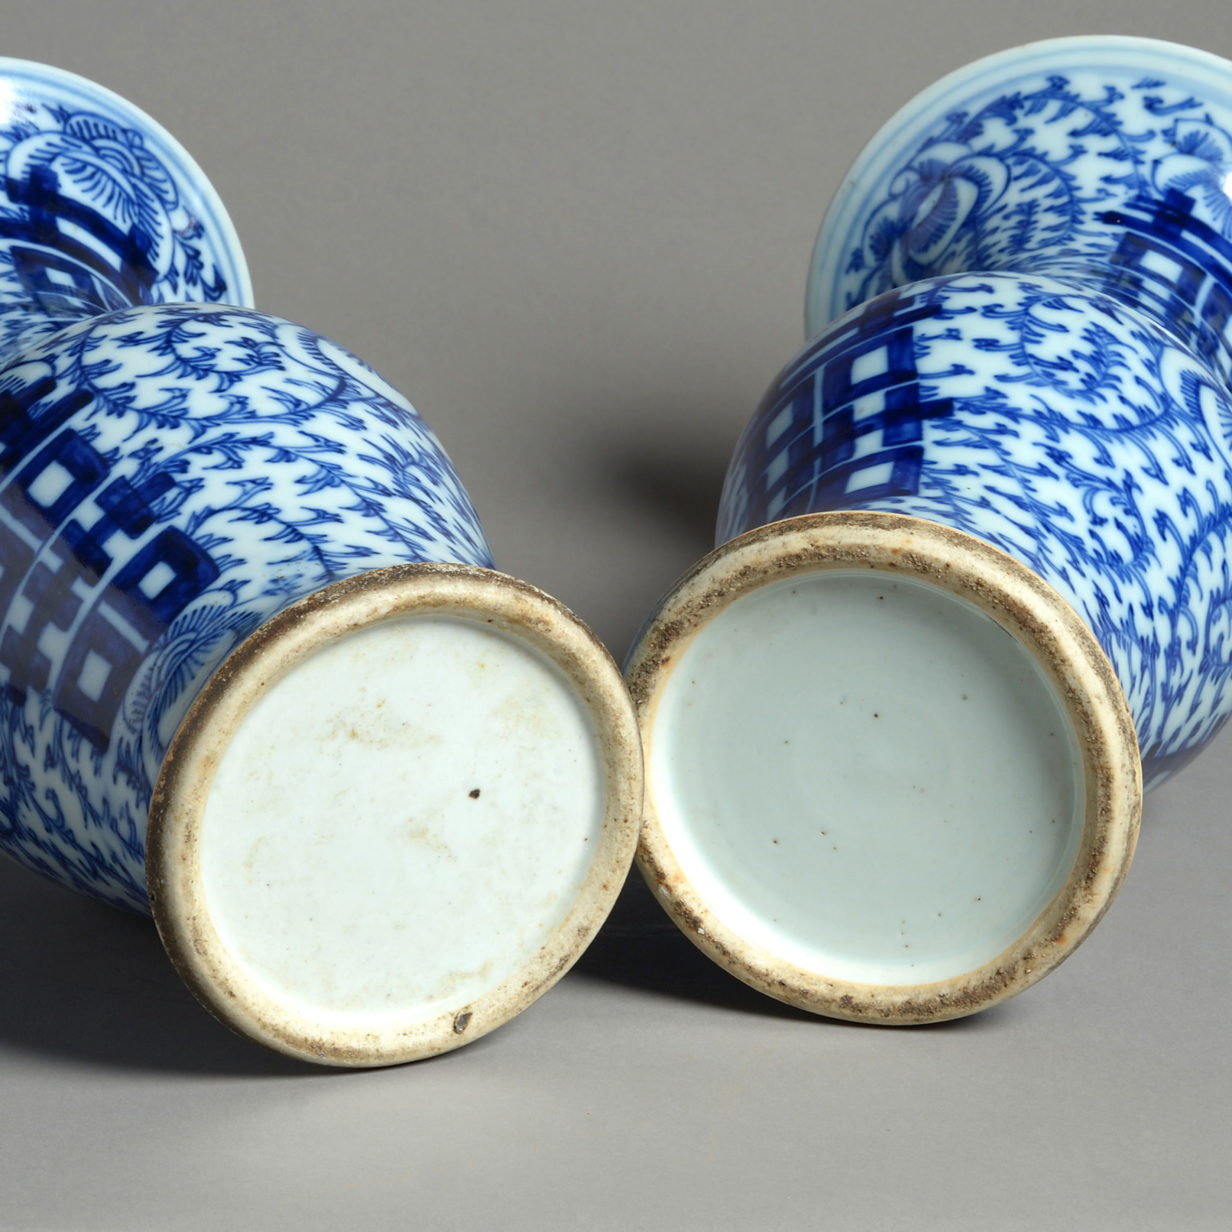 A 19th century pair of blue and white porcelain trumpet vases